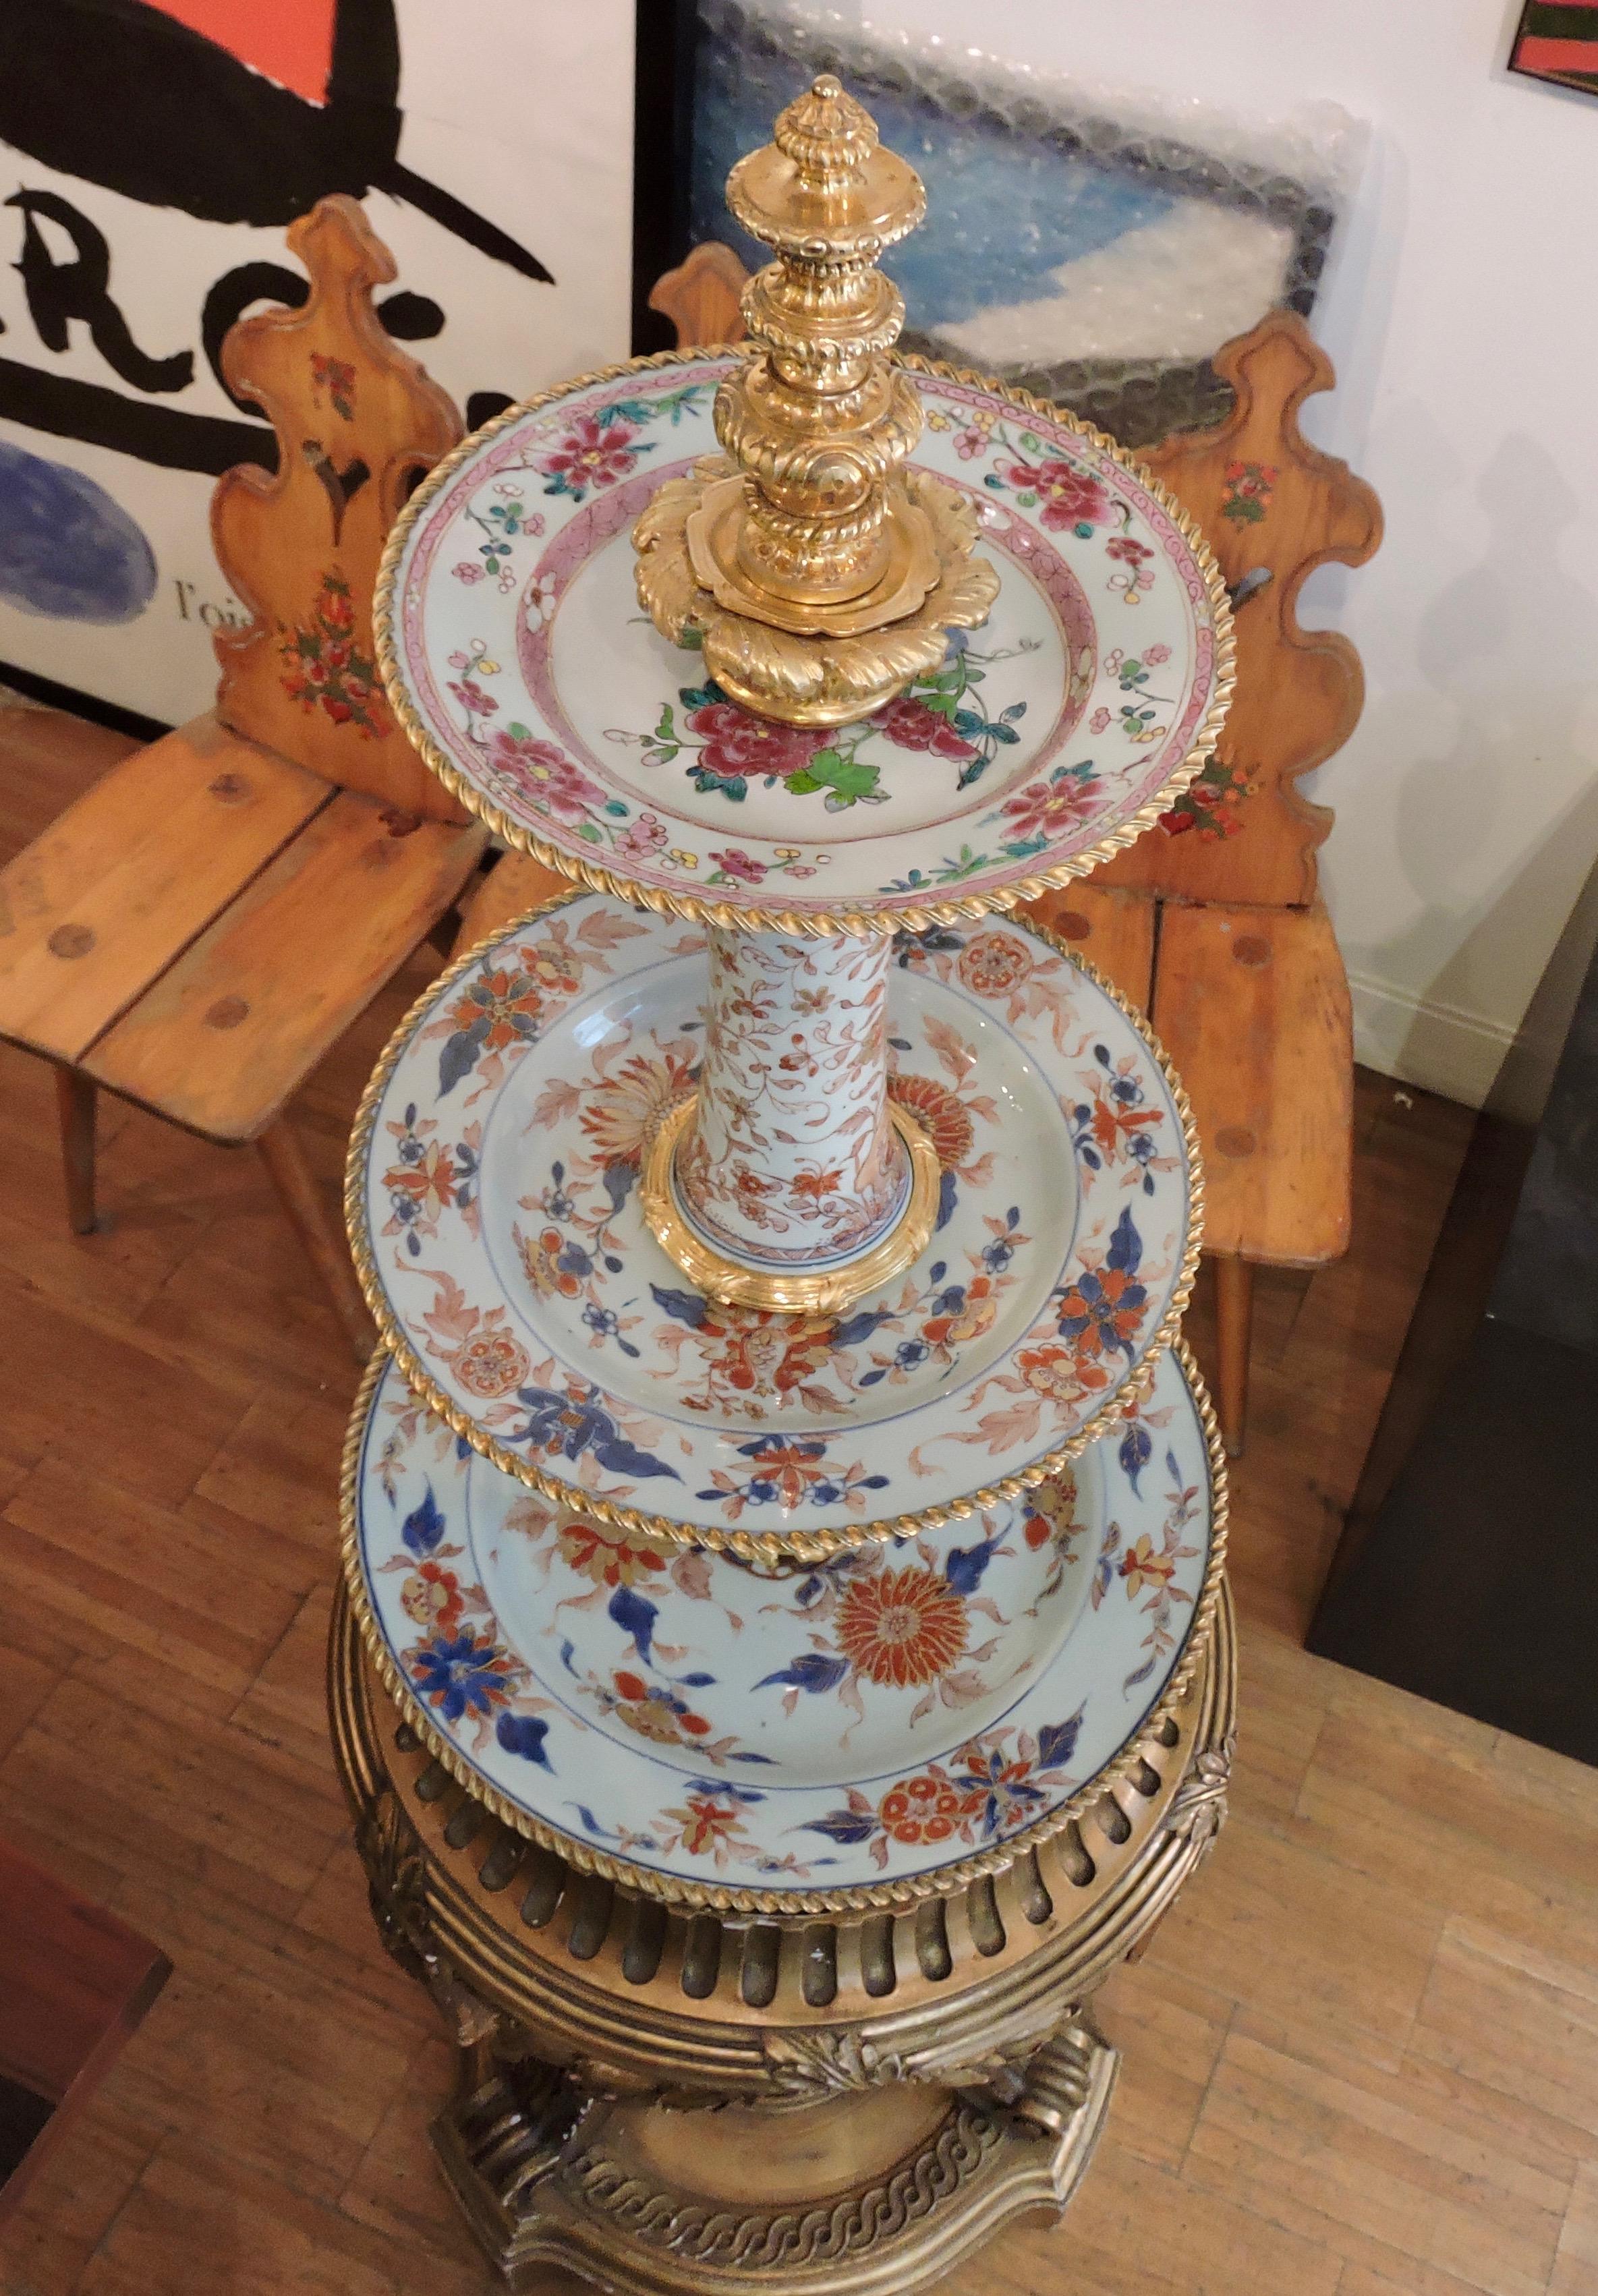 Chinoiserie 19th Century Ormolu-Mounted and 18th Century Chinese Porcelain Centrepiece